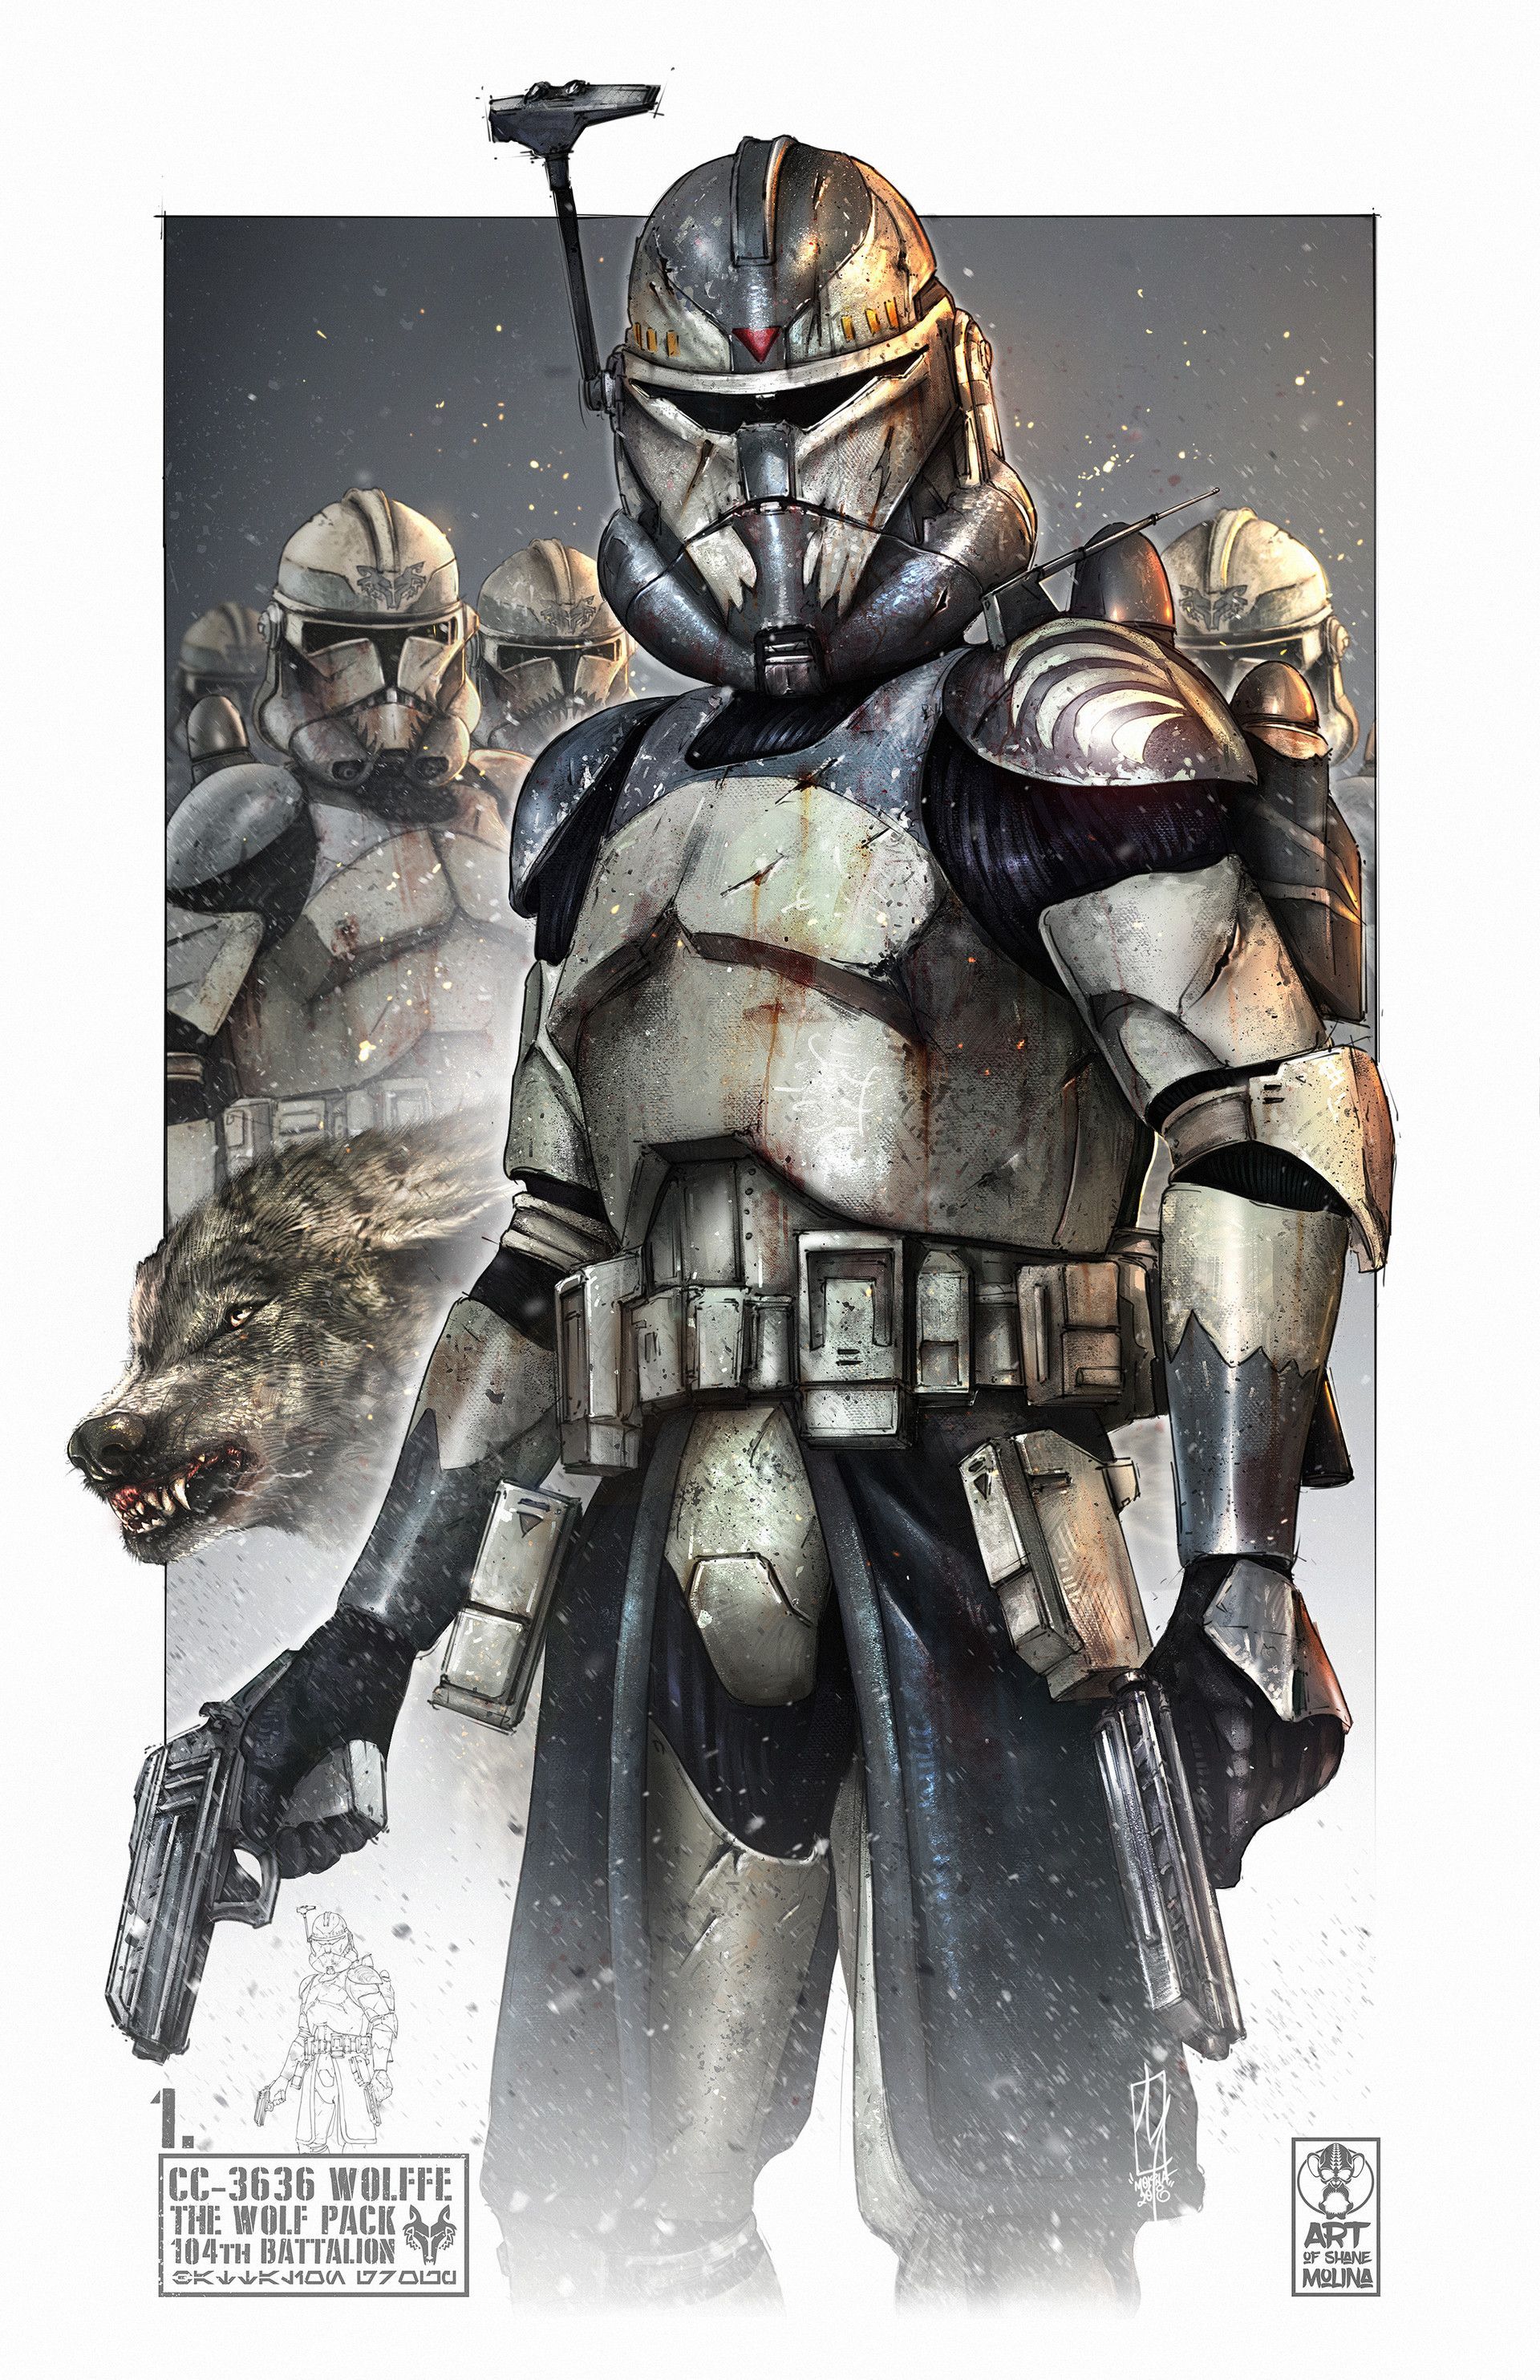 CC 3636 WOLFFE, Shane Molina. Star Wars Characters Picture, Star Wars Image, Star Wars Poster